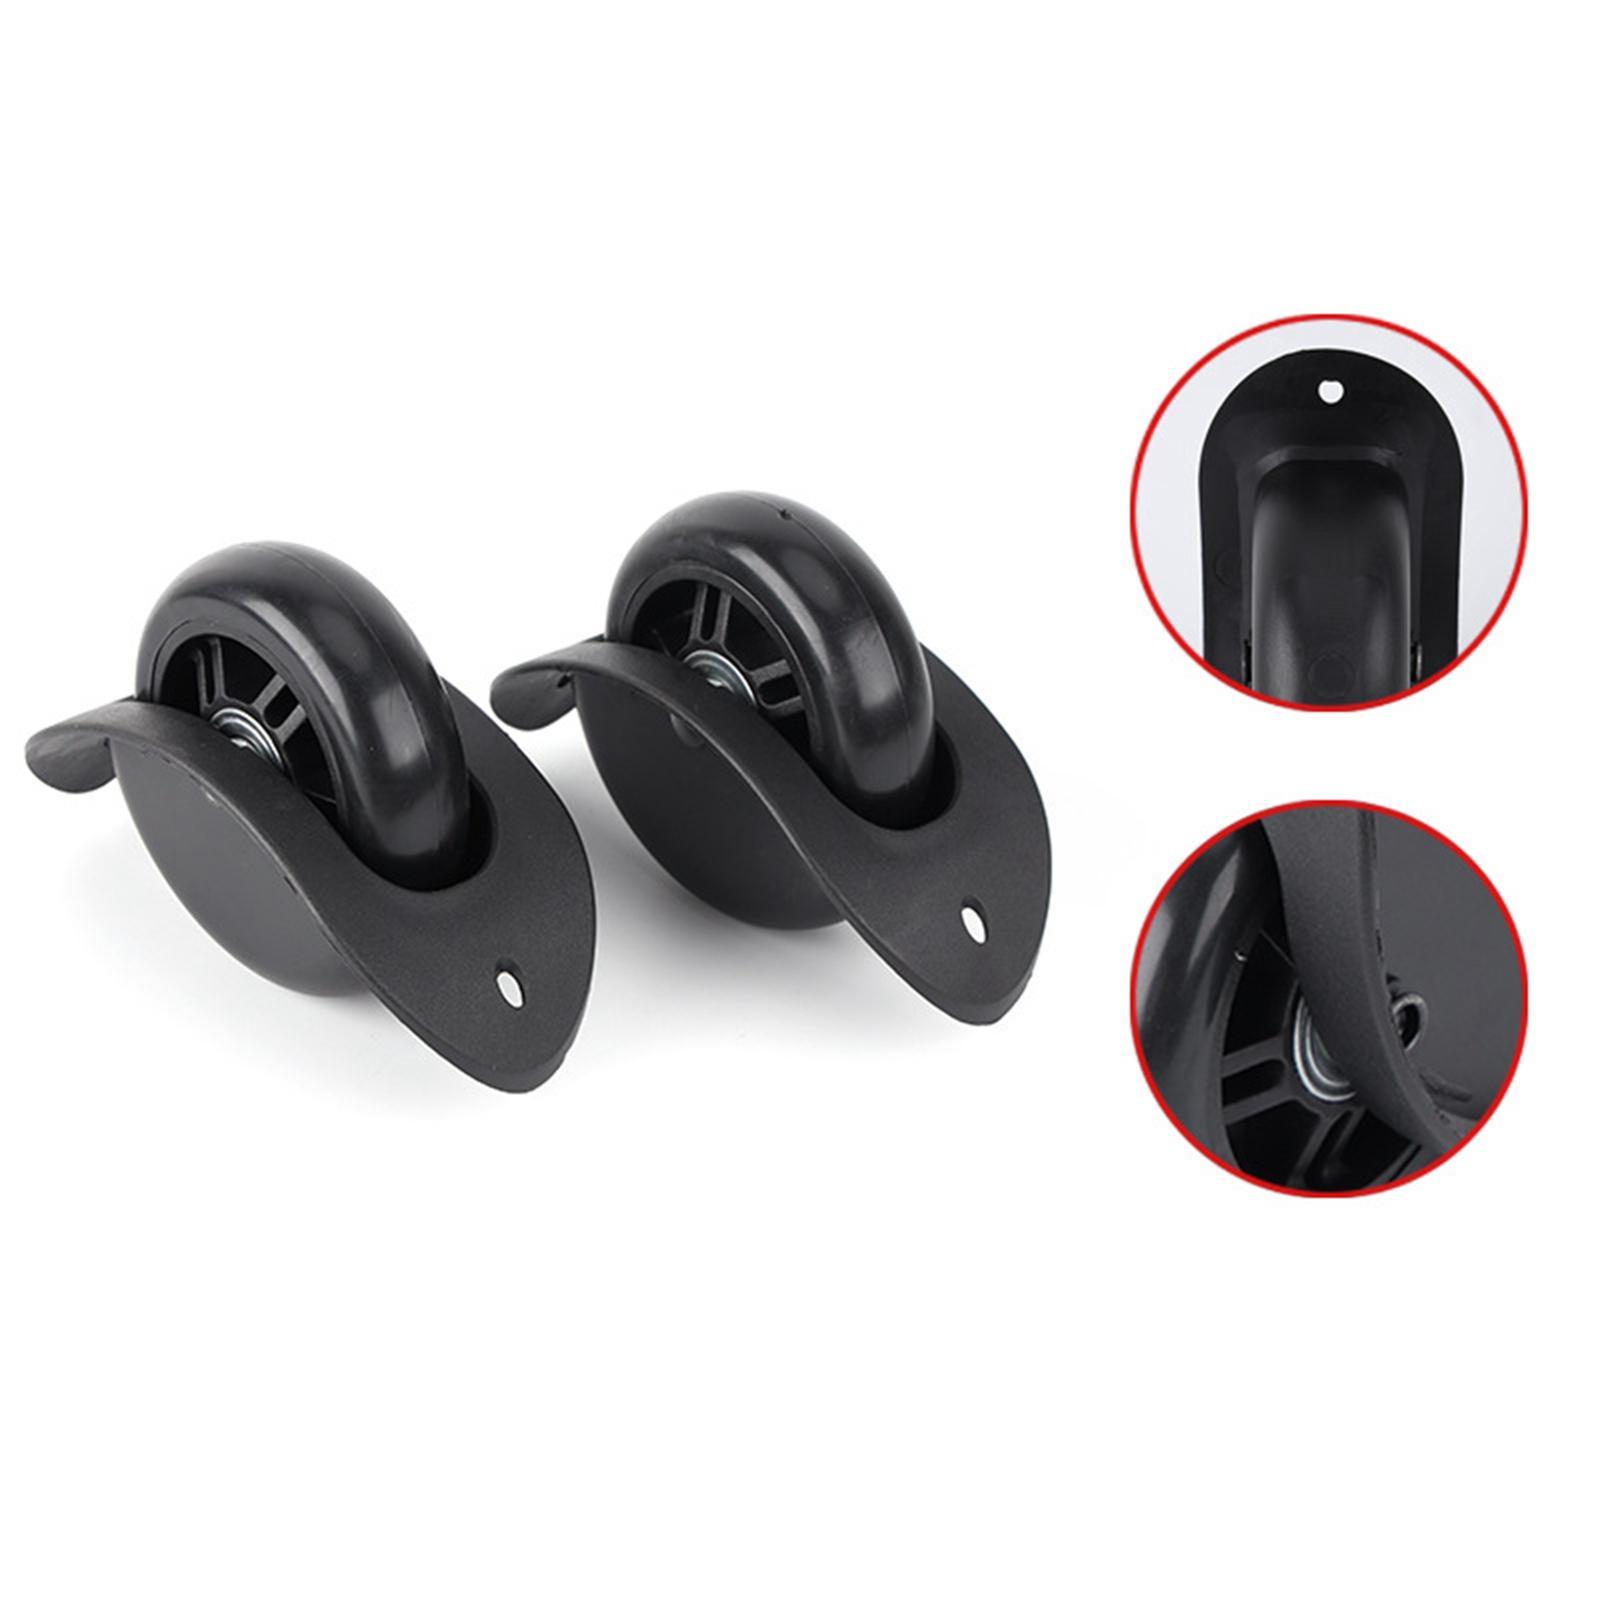 2 Pieces Luggage Replacement Wheels, Mute Smooth Suitcase Wheels Replacement for Suitcase Trolley Luggage